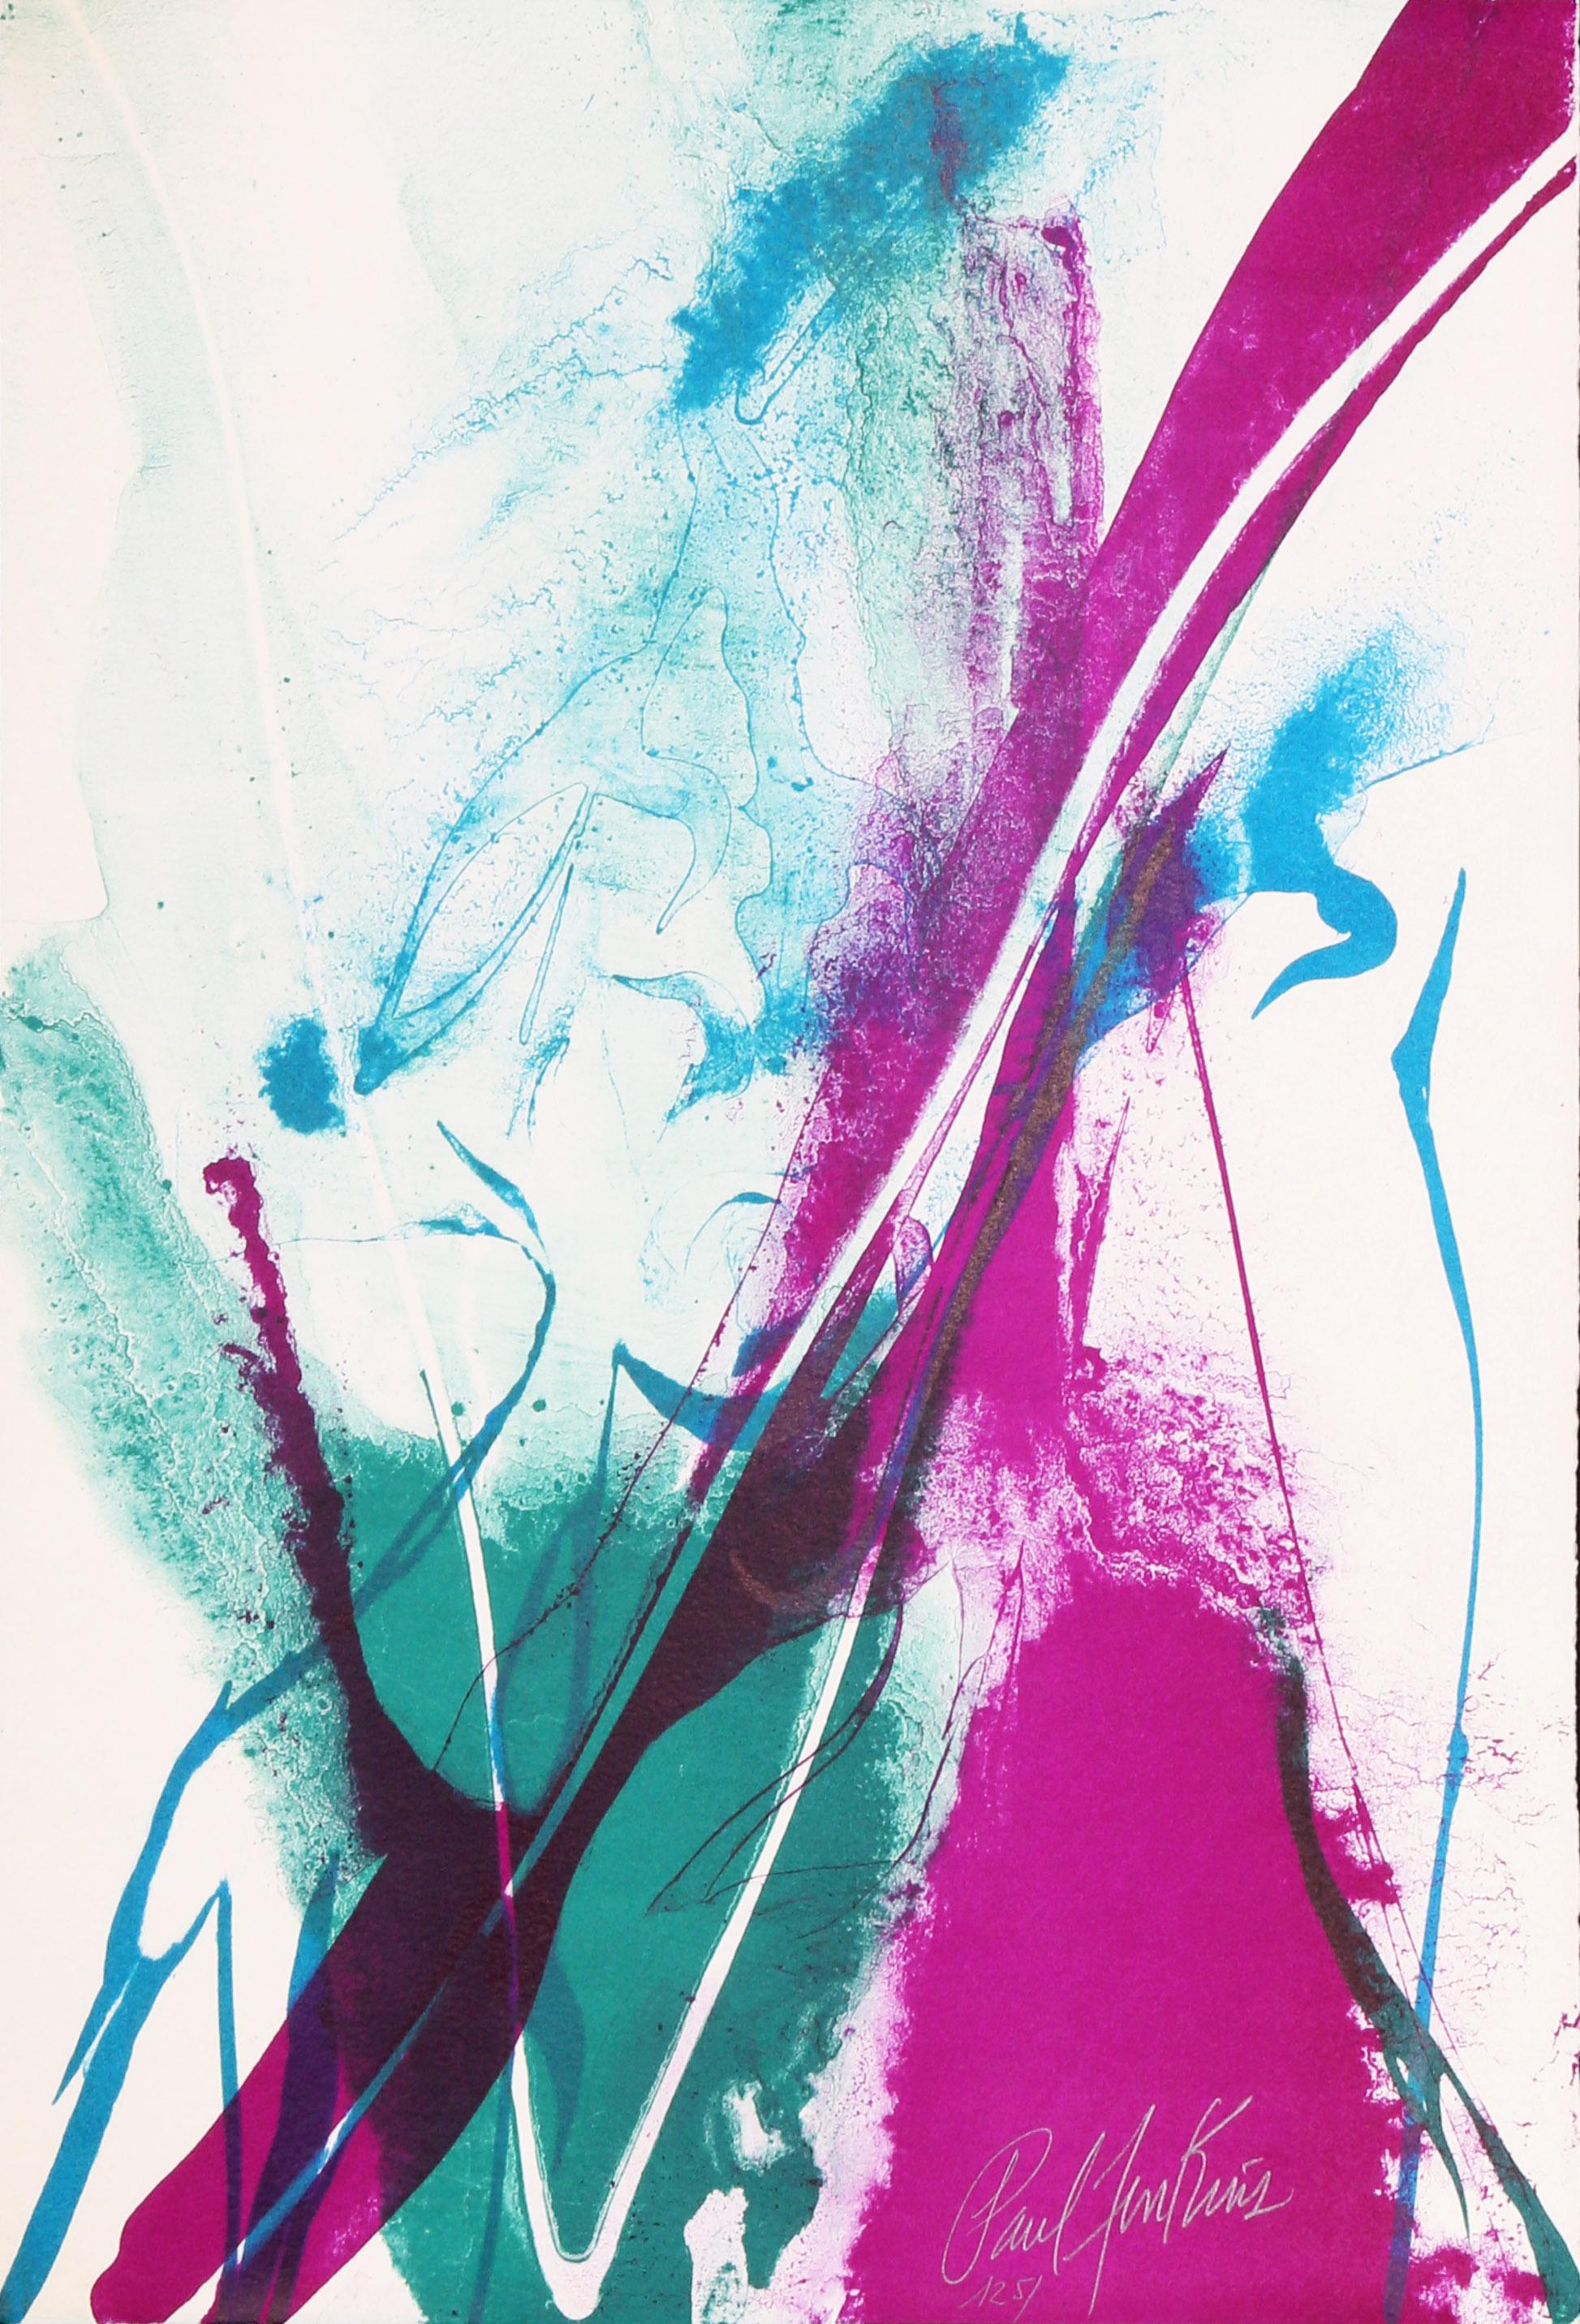 A lithograph from the portfolio "Seeing Voices", a collection that also includes several poems. This abstract piece by Paul Jenkins is signed and numbered on the front of the print in pencil.

Seeing Voices 1
Paul Jenkins, American